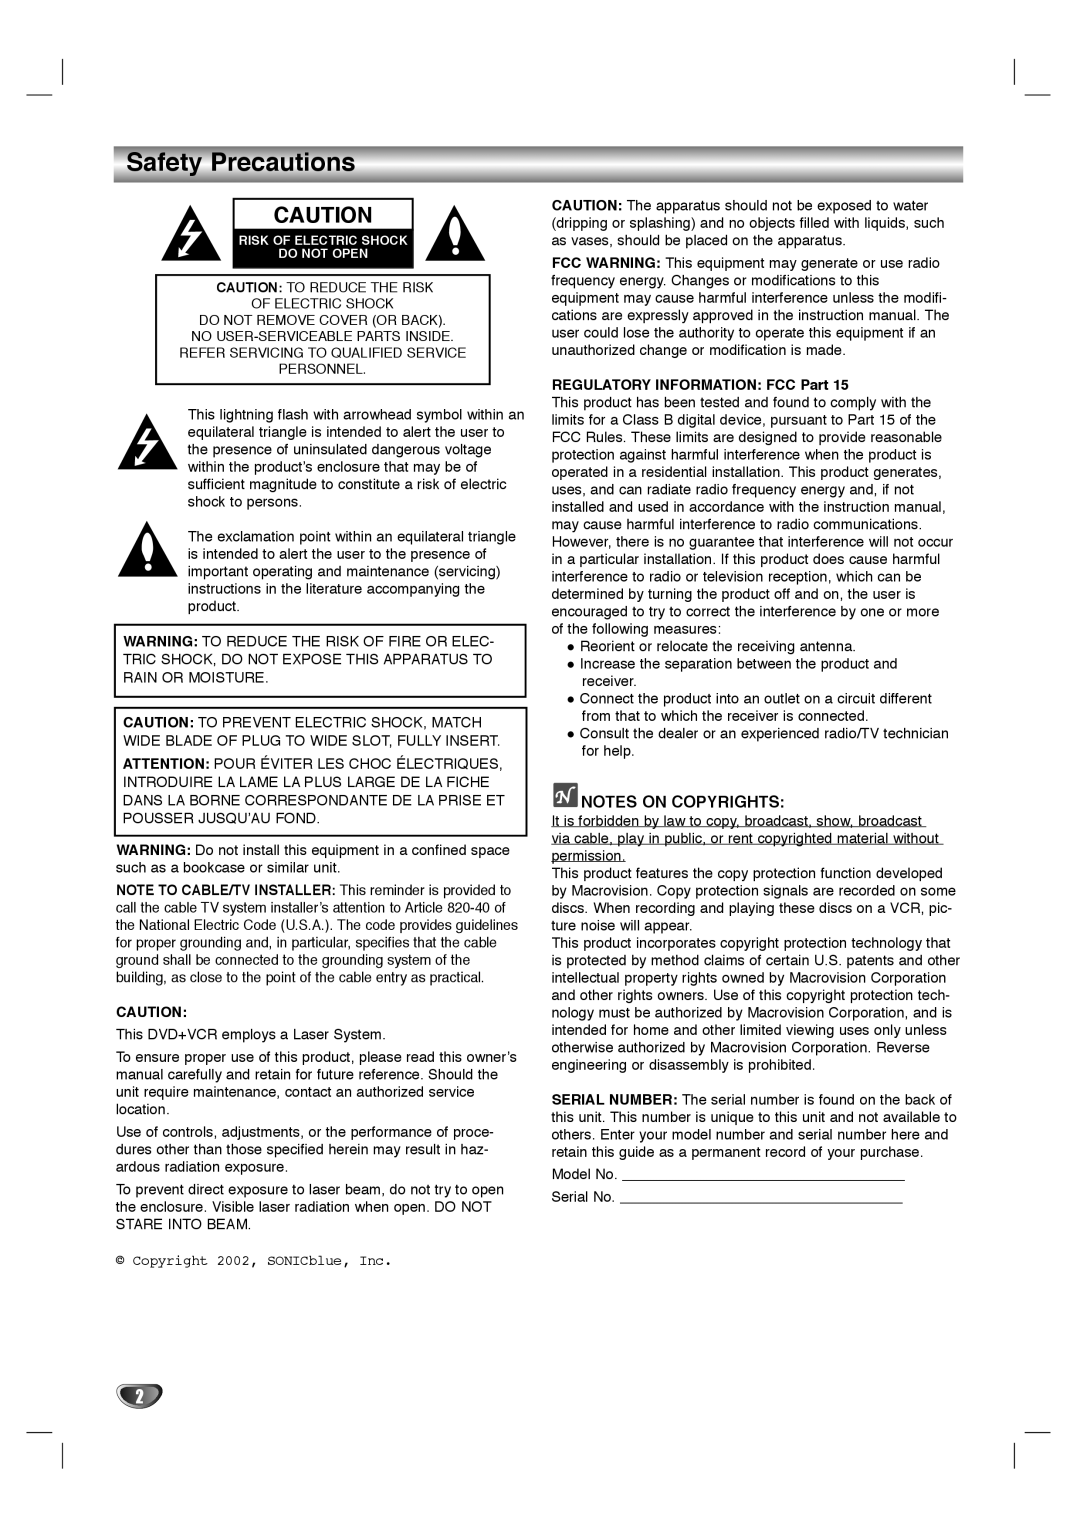 Dolby Laboratories HT2030 manual Safety Precautions, Notes On Copyrights, REGULATORY INFORMATION FCC Part 